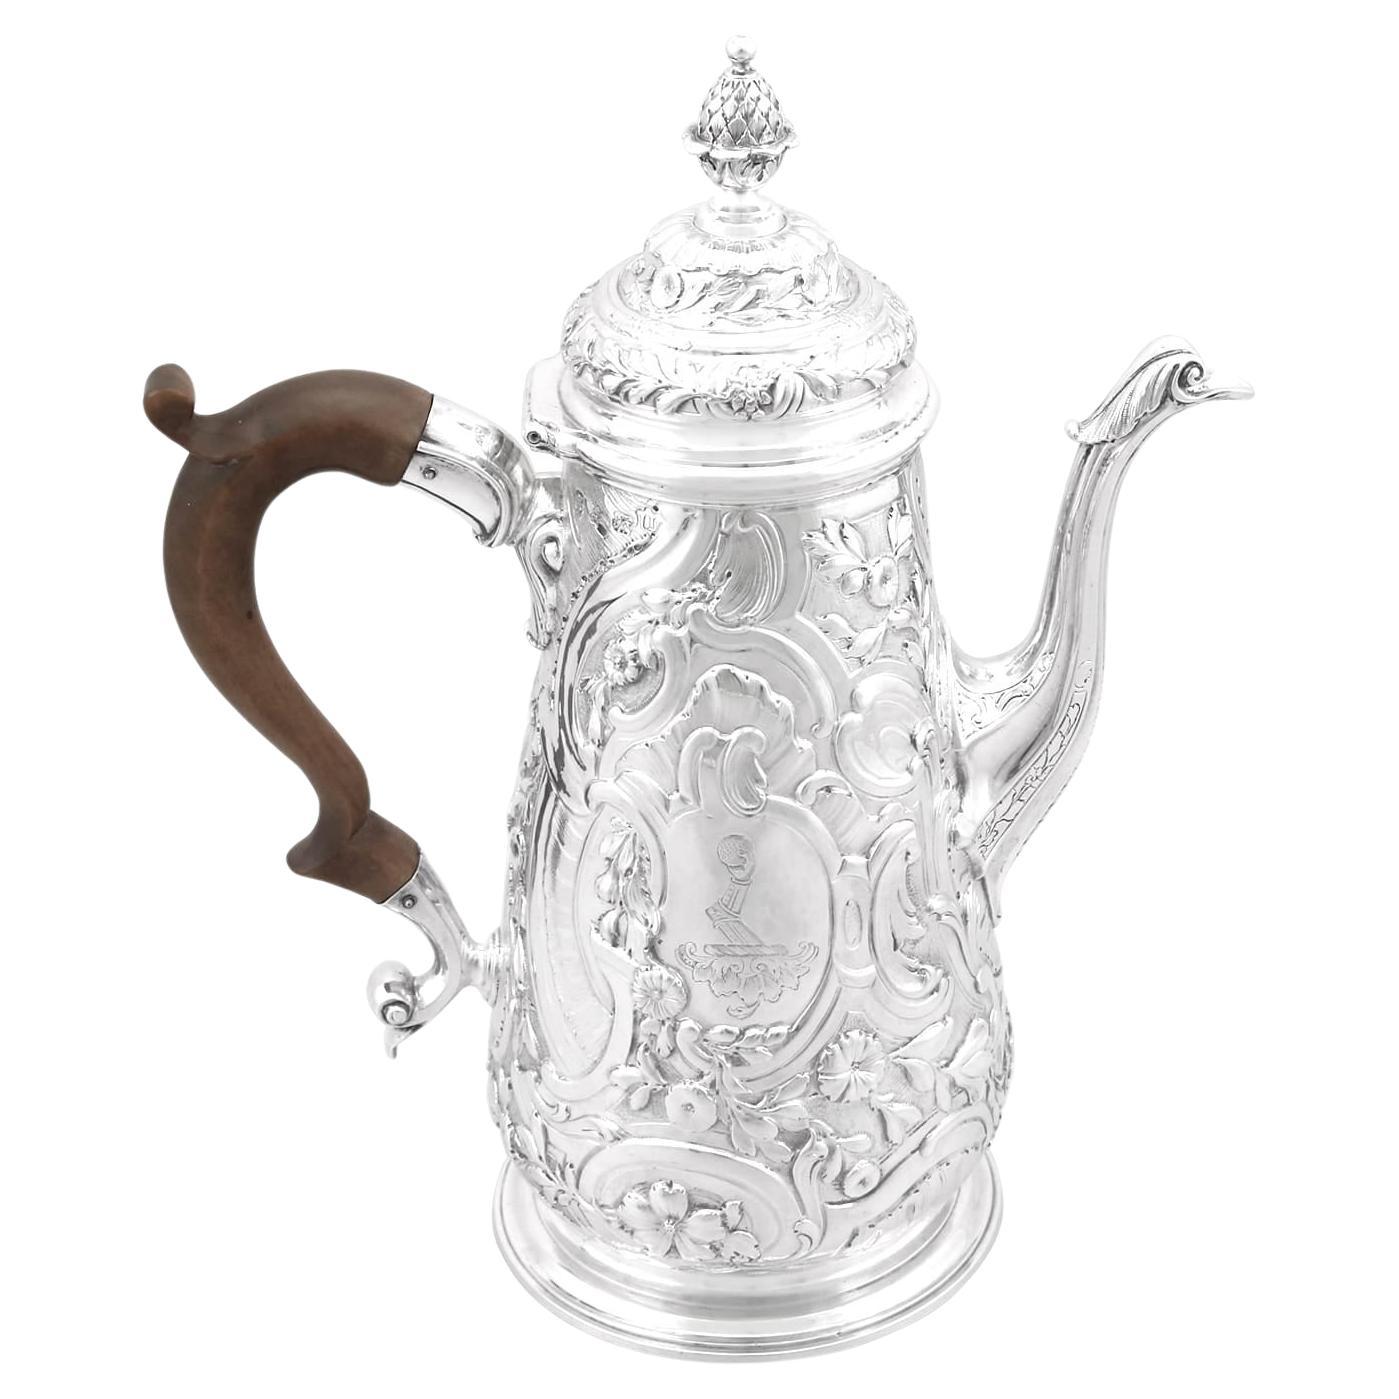 Antique Sterling Silver Coffee Pot 1748